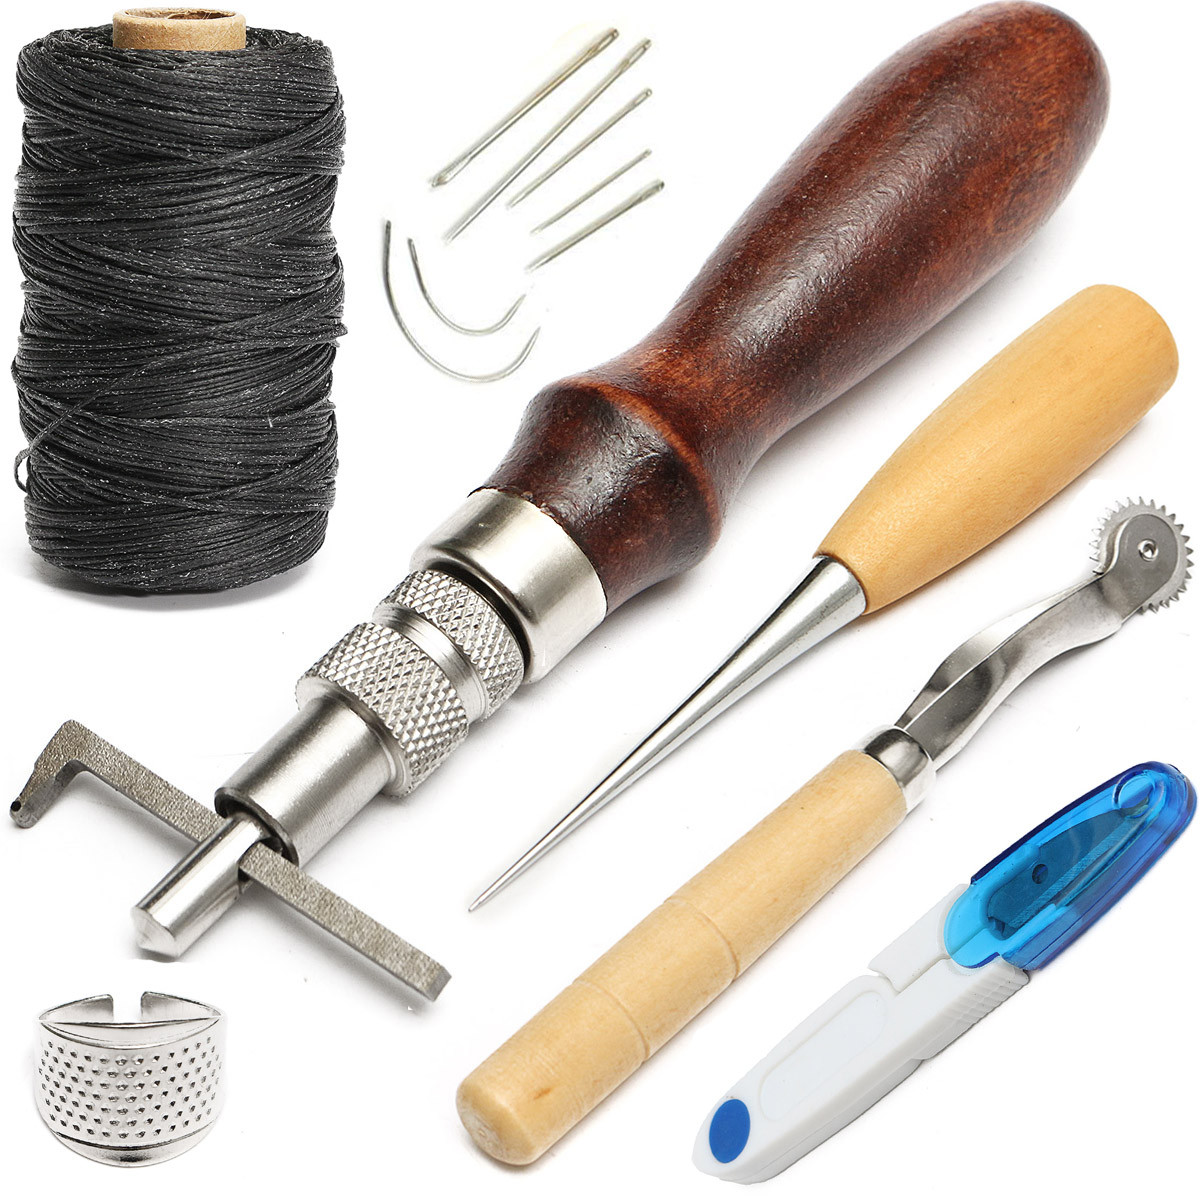 7 Pcs Set Cuir Carthert a la main Coutures a coudre Kit a outils Thread Awl Waxed Diner DIY